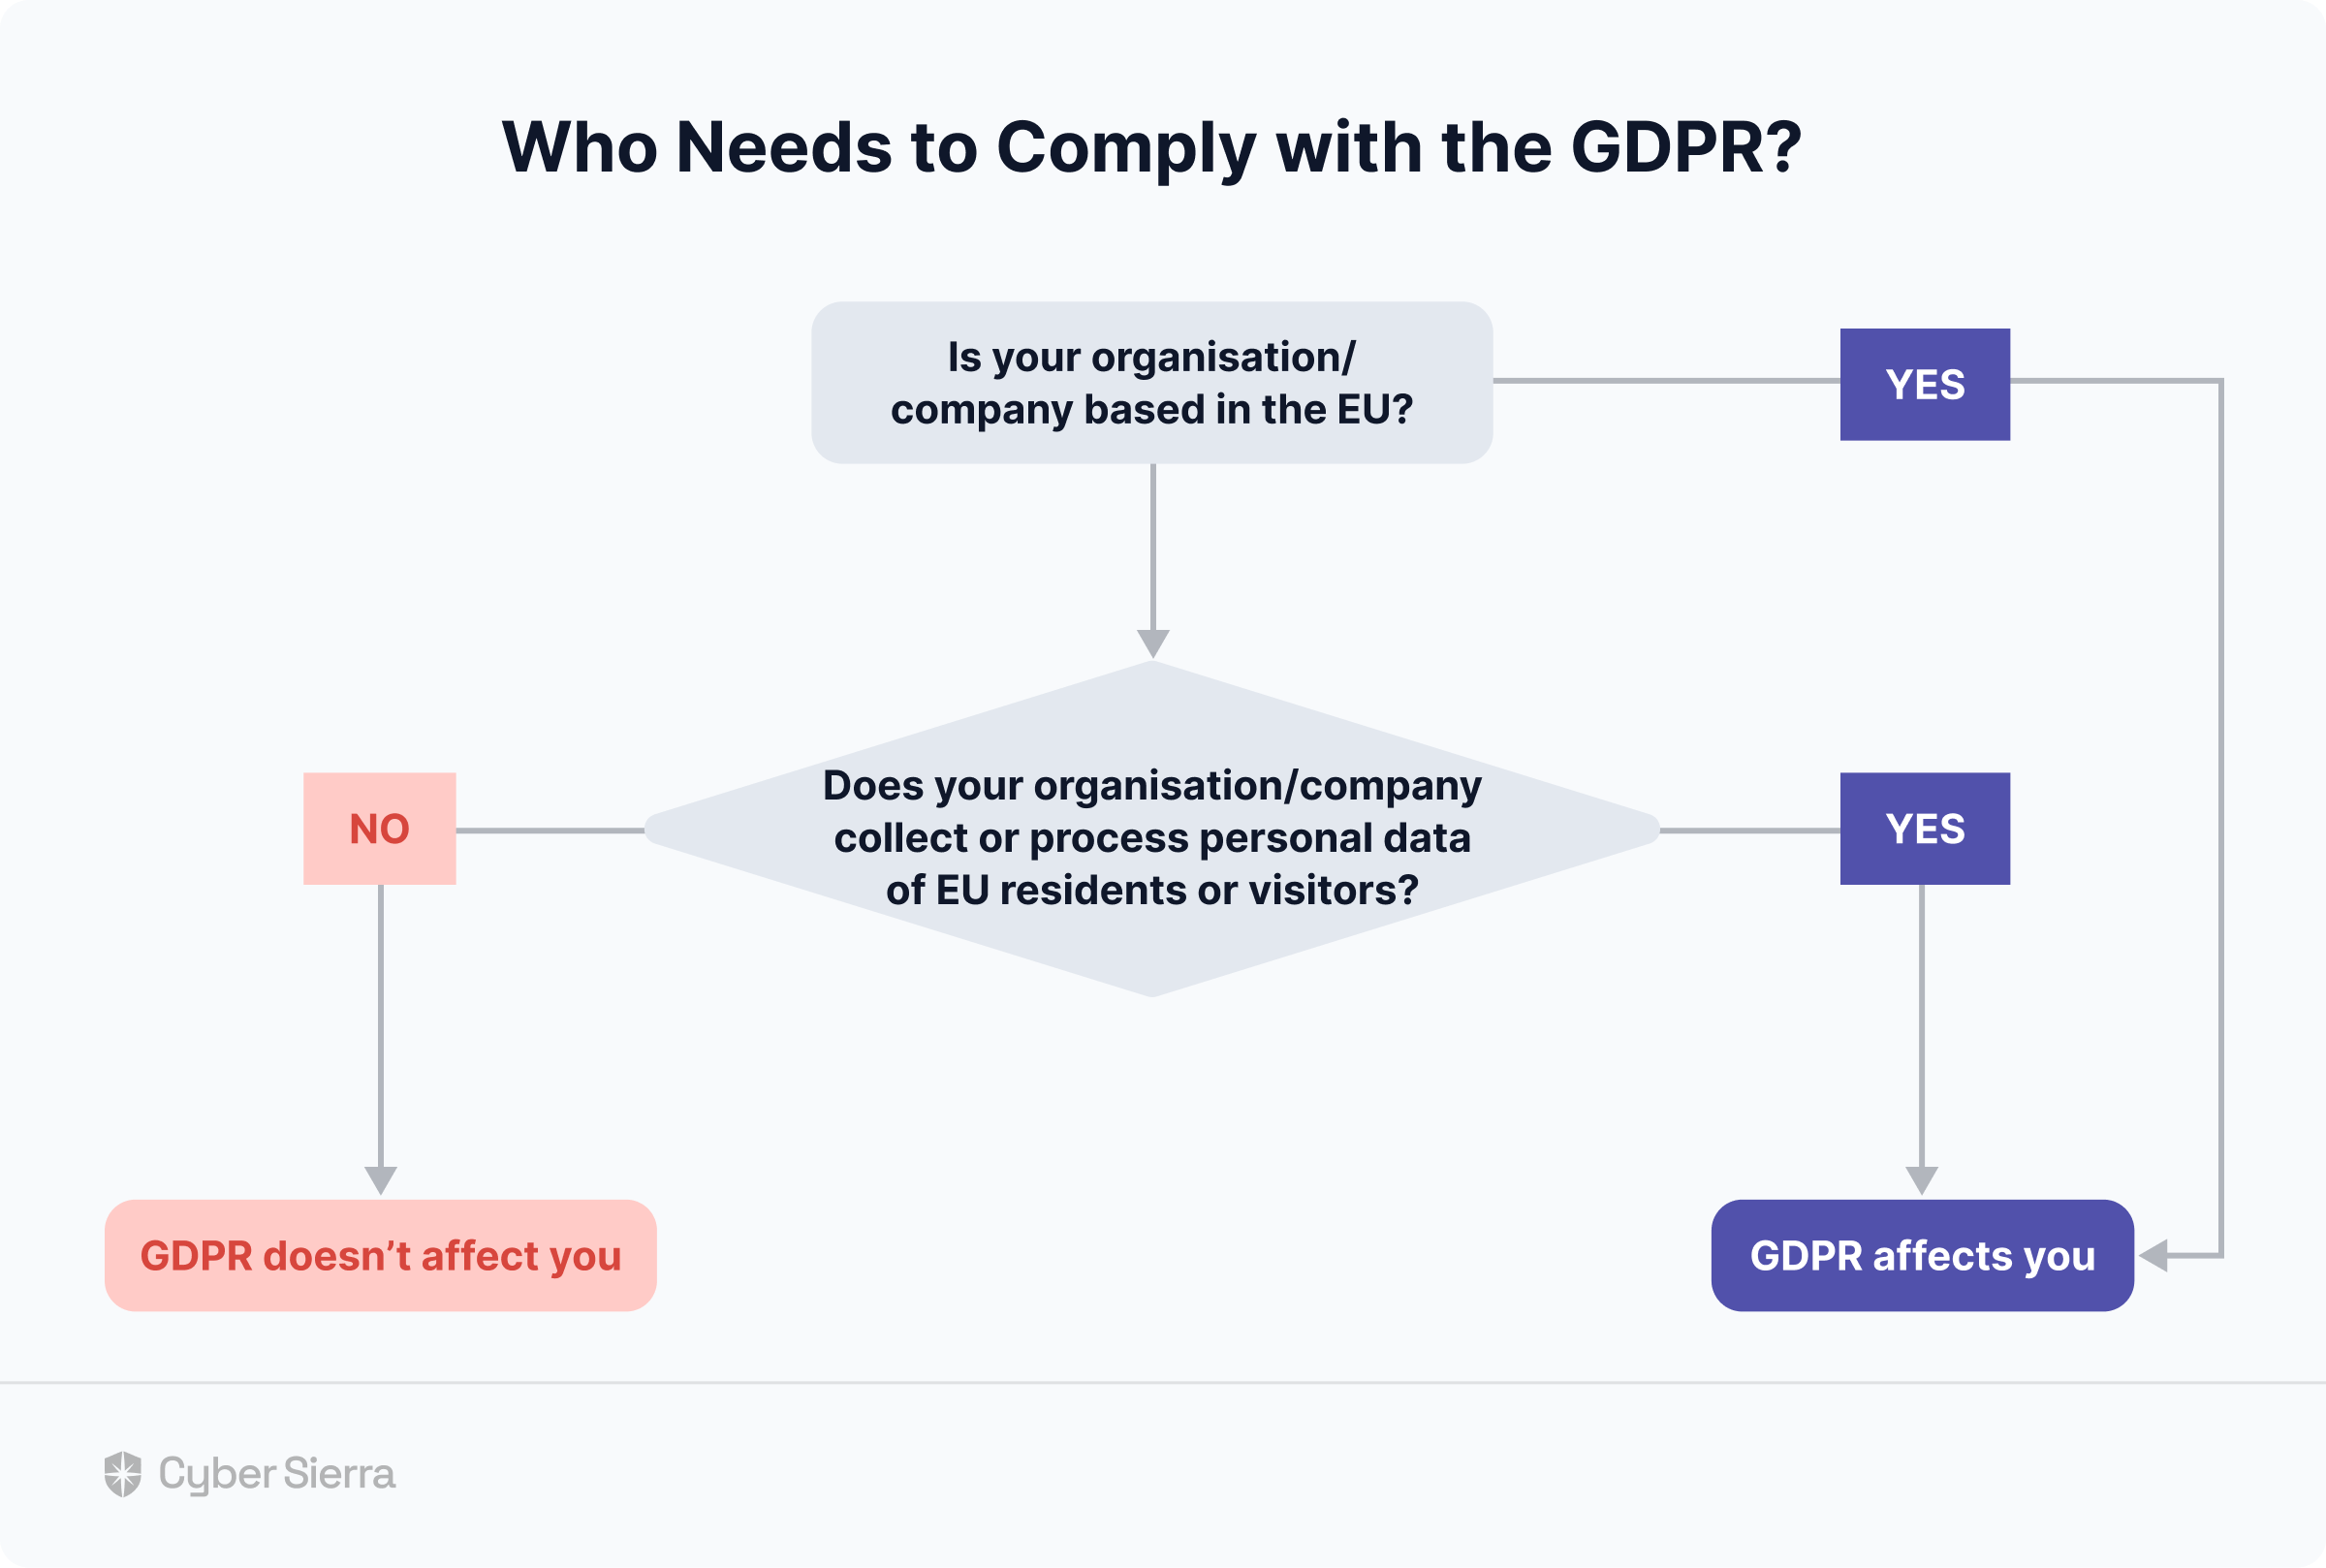 Does GDPR, an EU law, even apply to you? Organizations outside of Europe might ask this question. So before jumping into the checklist, here’s to re-clarify who must comply with the General Data Protection Regulation (GDPR): 